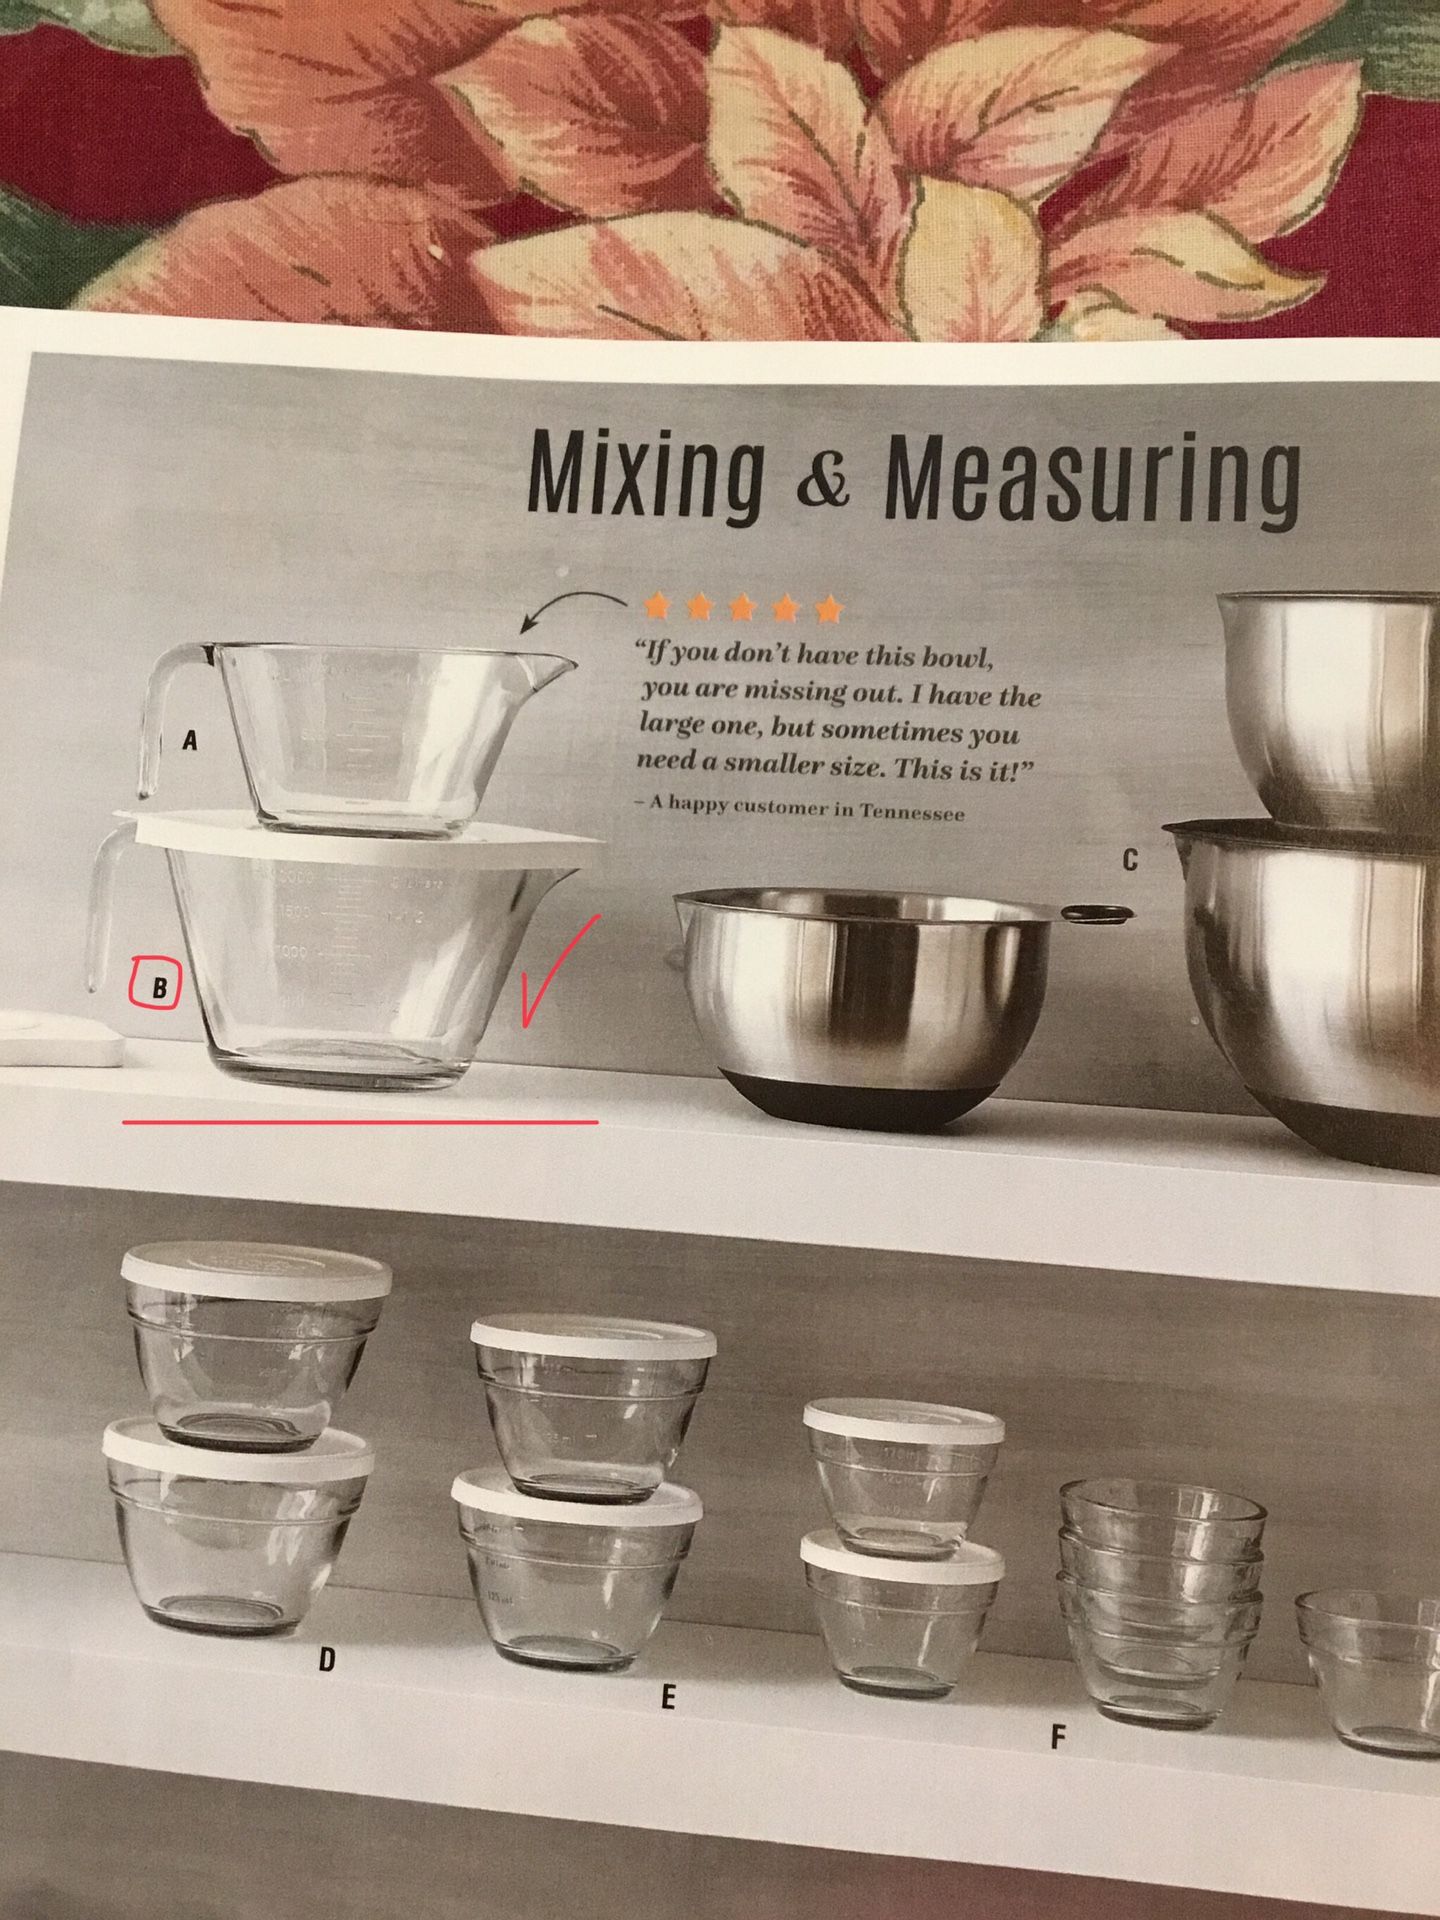 Pampered Chef Mixing And Measuring Silicone Bowl, Batter Bowl And Ceramic Egg Cooker 